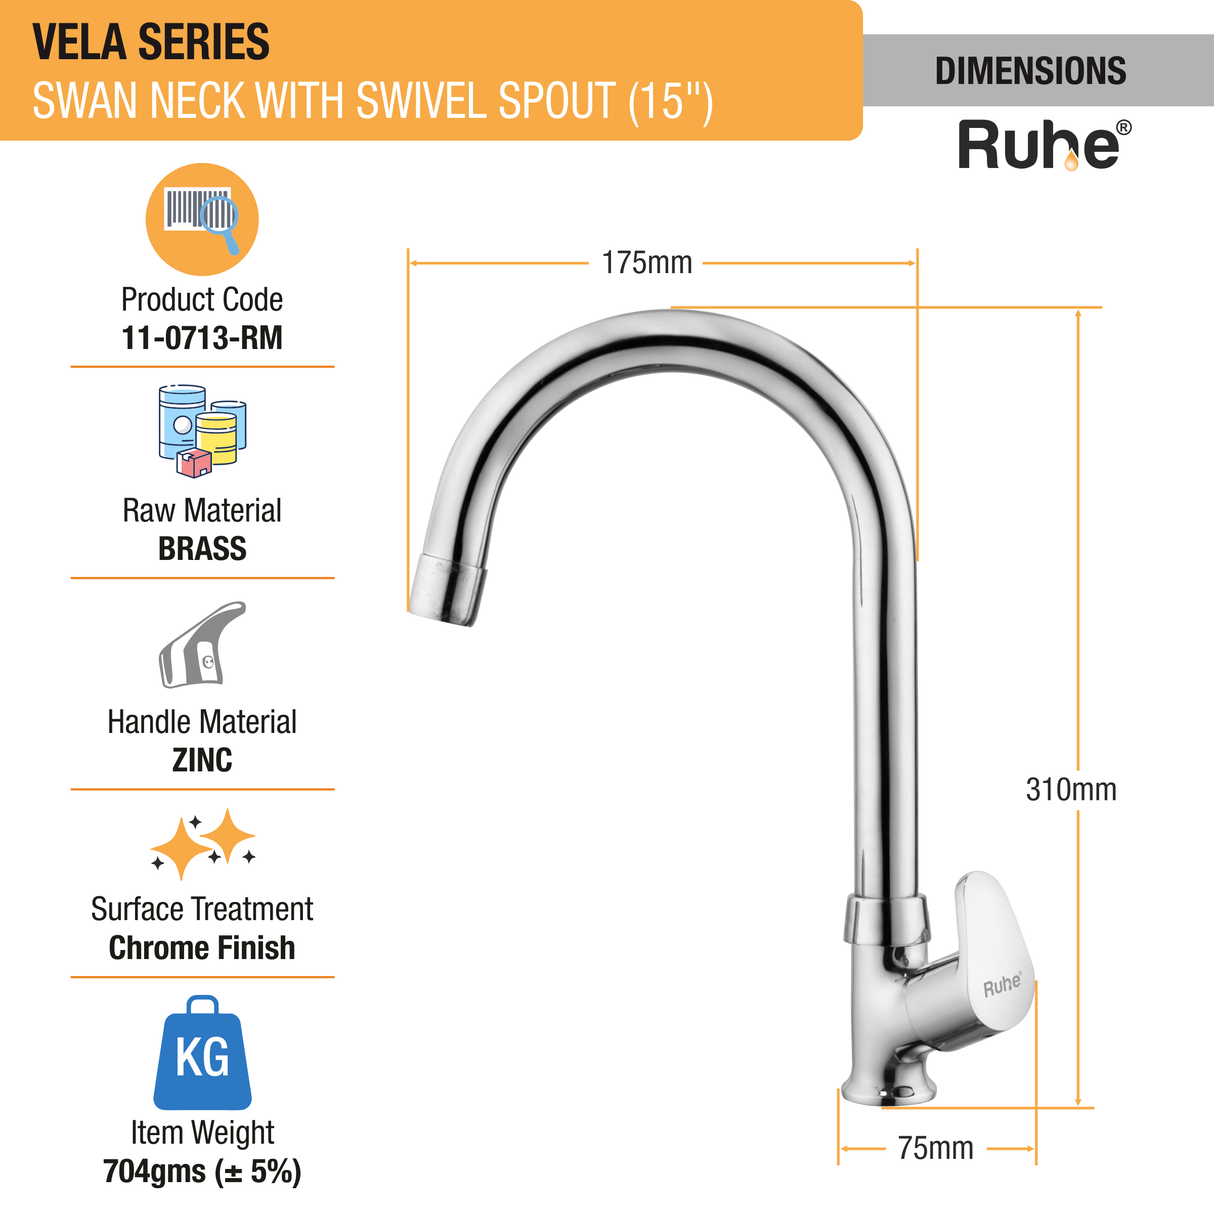 Vela Swan Neck with Medium (15 inches) Round Swivel Spout Faucet sizes